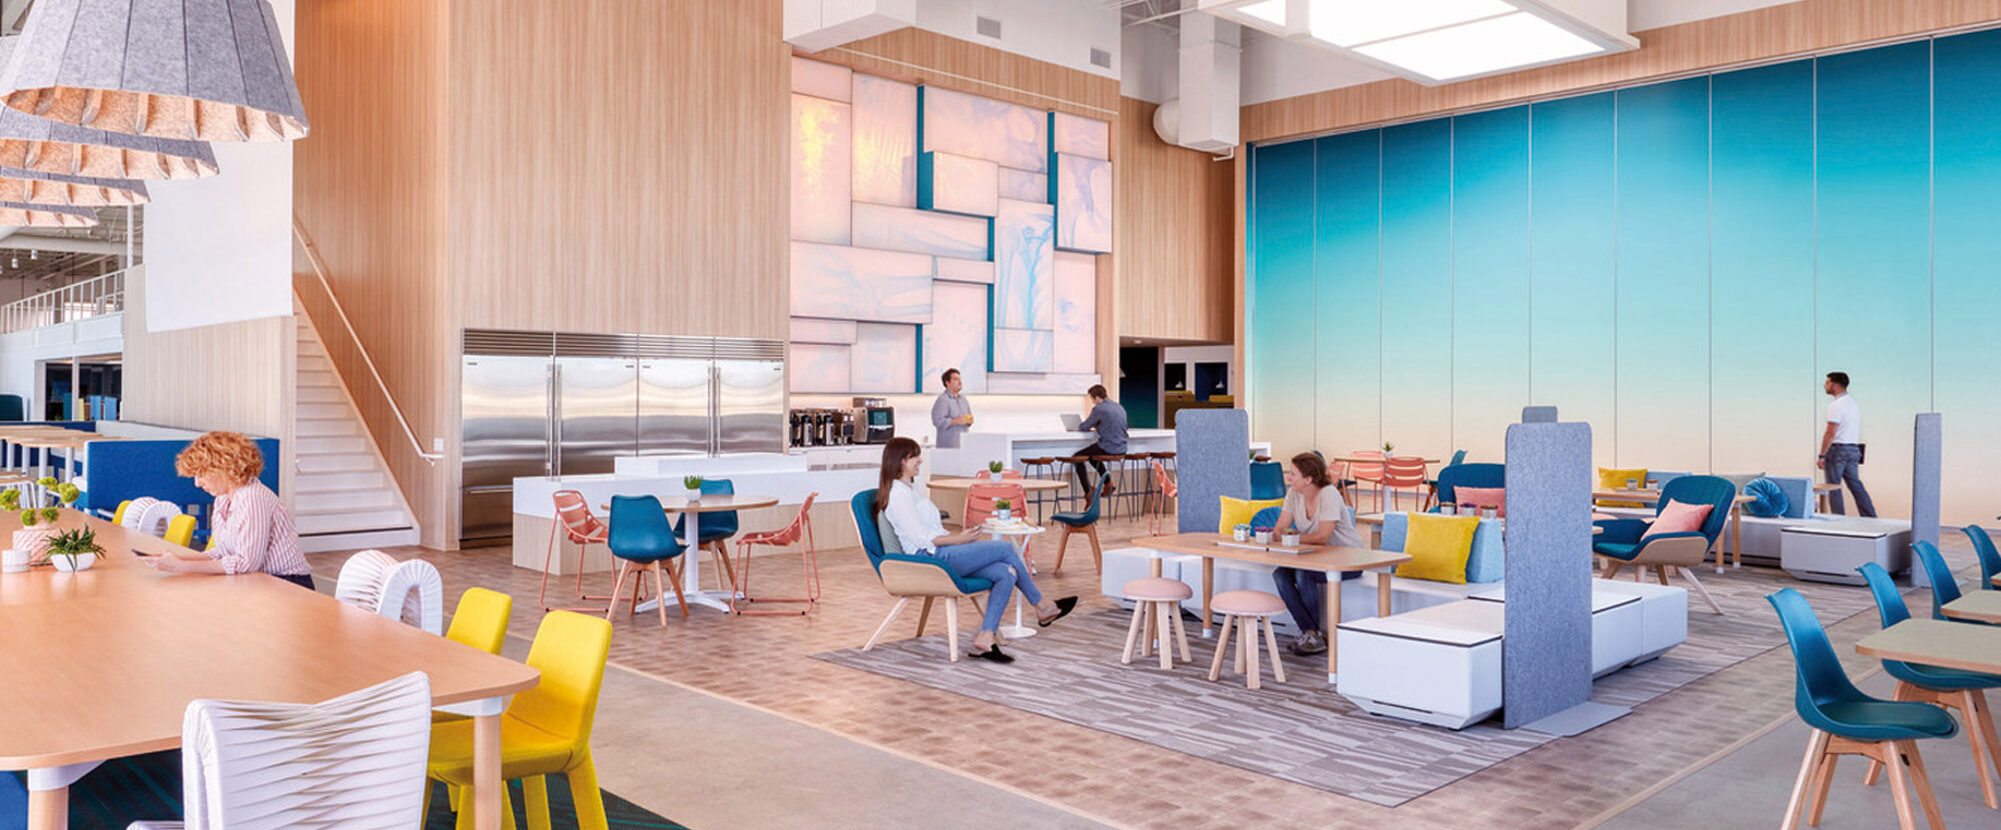 Bright and contemporary open-concept workspace featuring a mix of casual and formal seating arrangements, vibrant color pops on furniture, natural wood paneling, and a striking blue glass partition, creating a dynamic and inviting environment for collaboration and productivity.